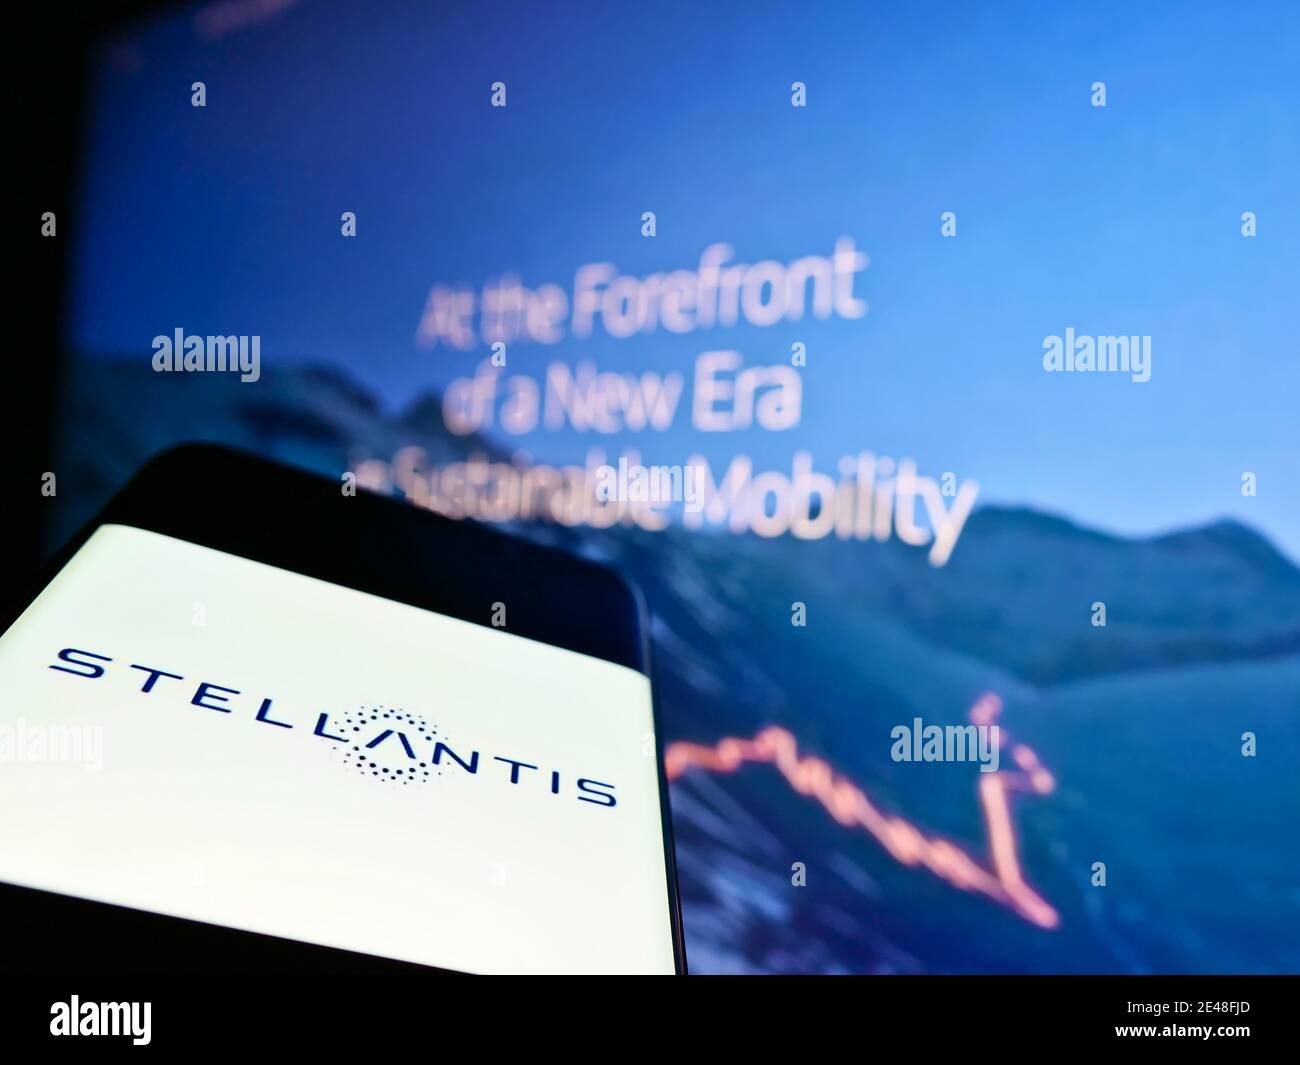 Mobile phone with logo of automotive company Stellantis N.V. on screen in front of company website. Focus on center of smartphone screen. Stock Photo